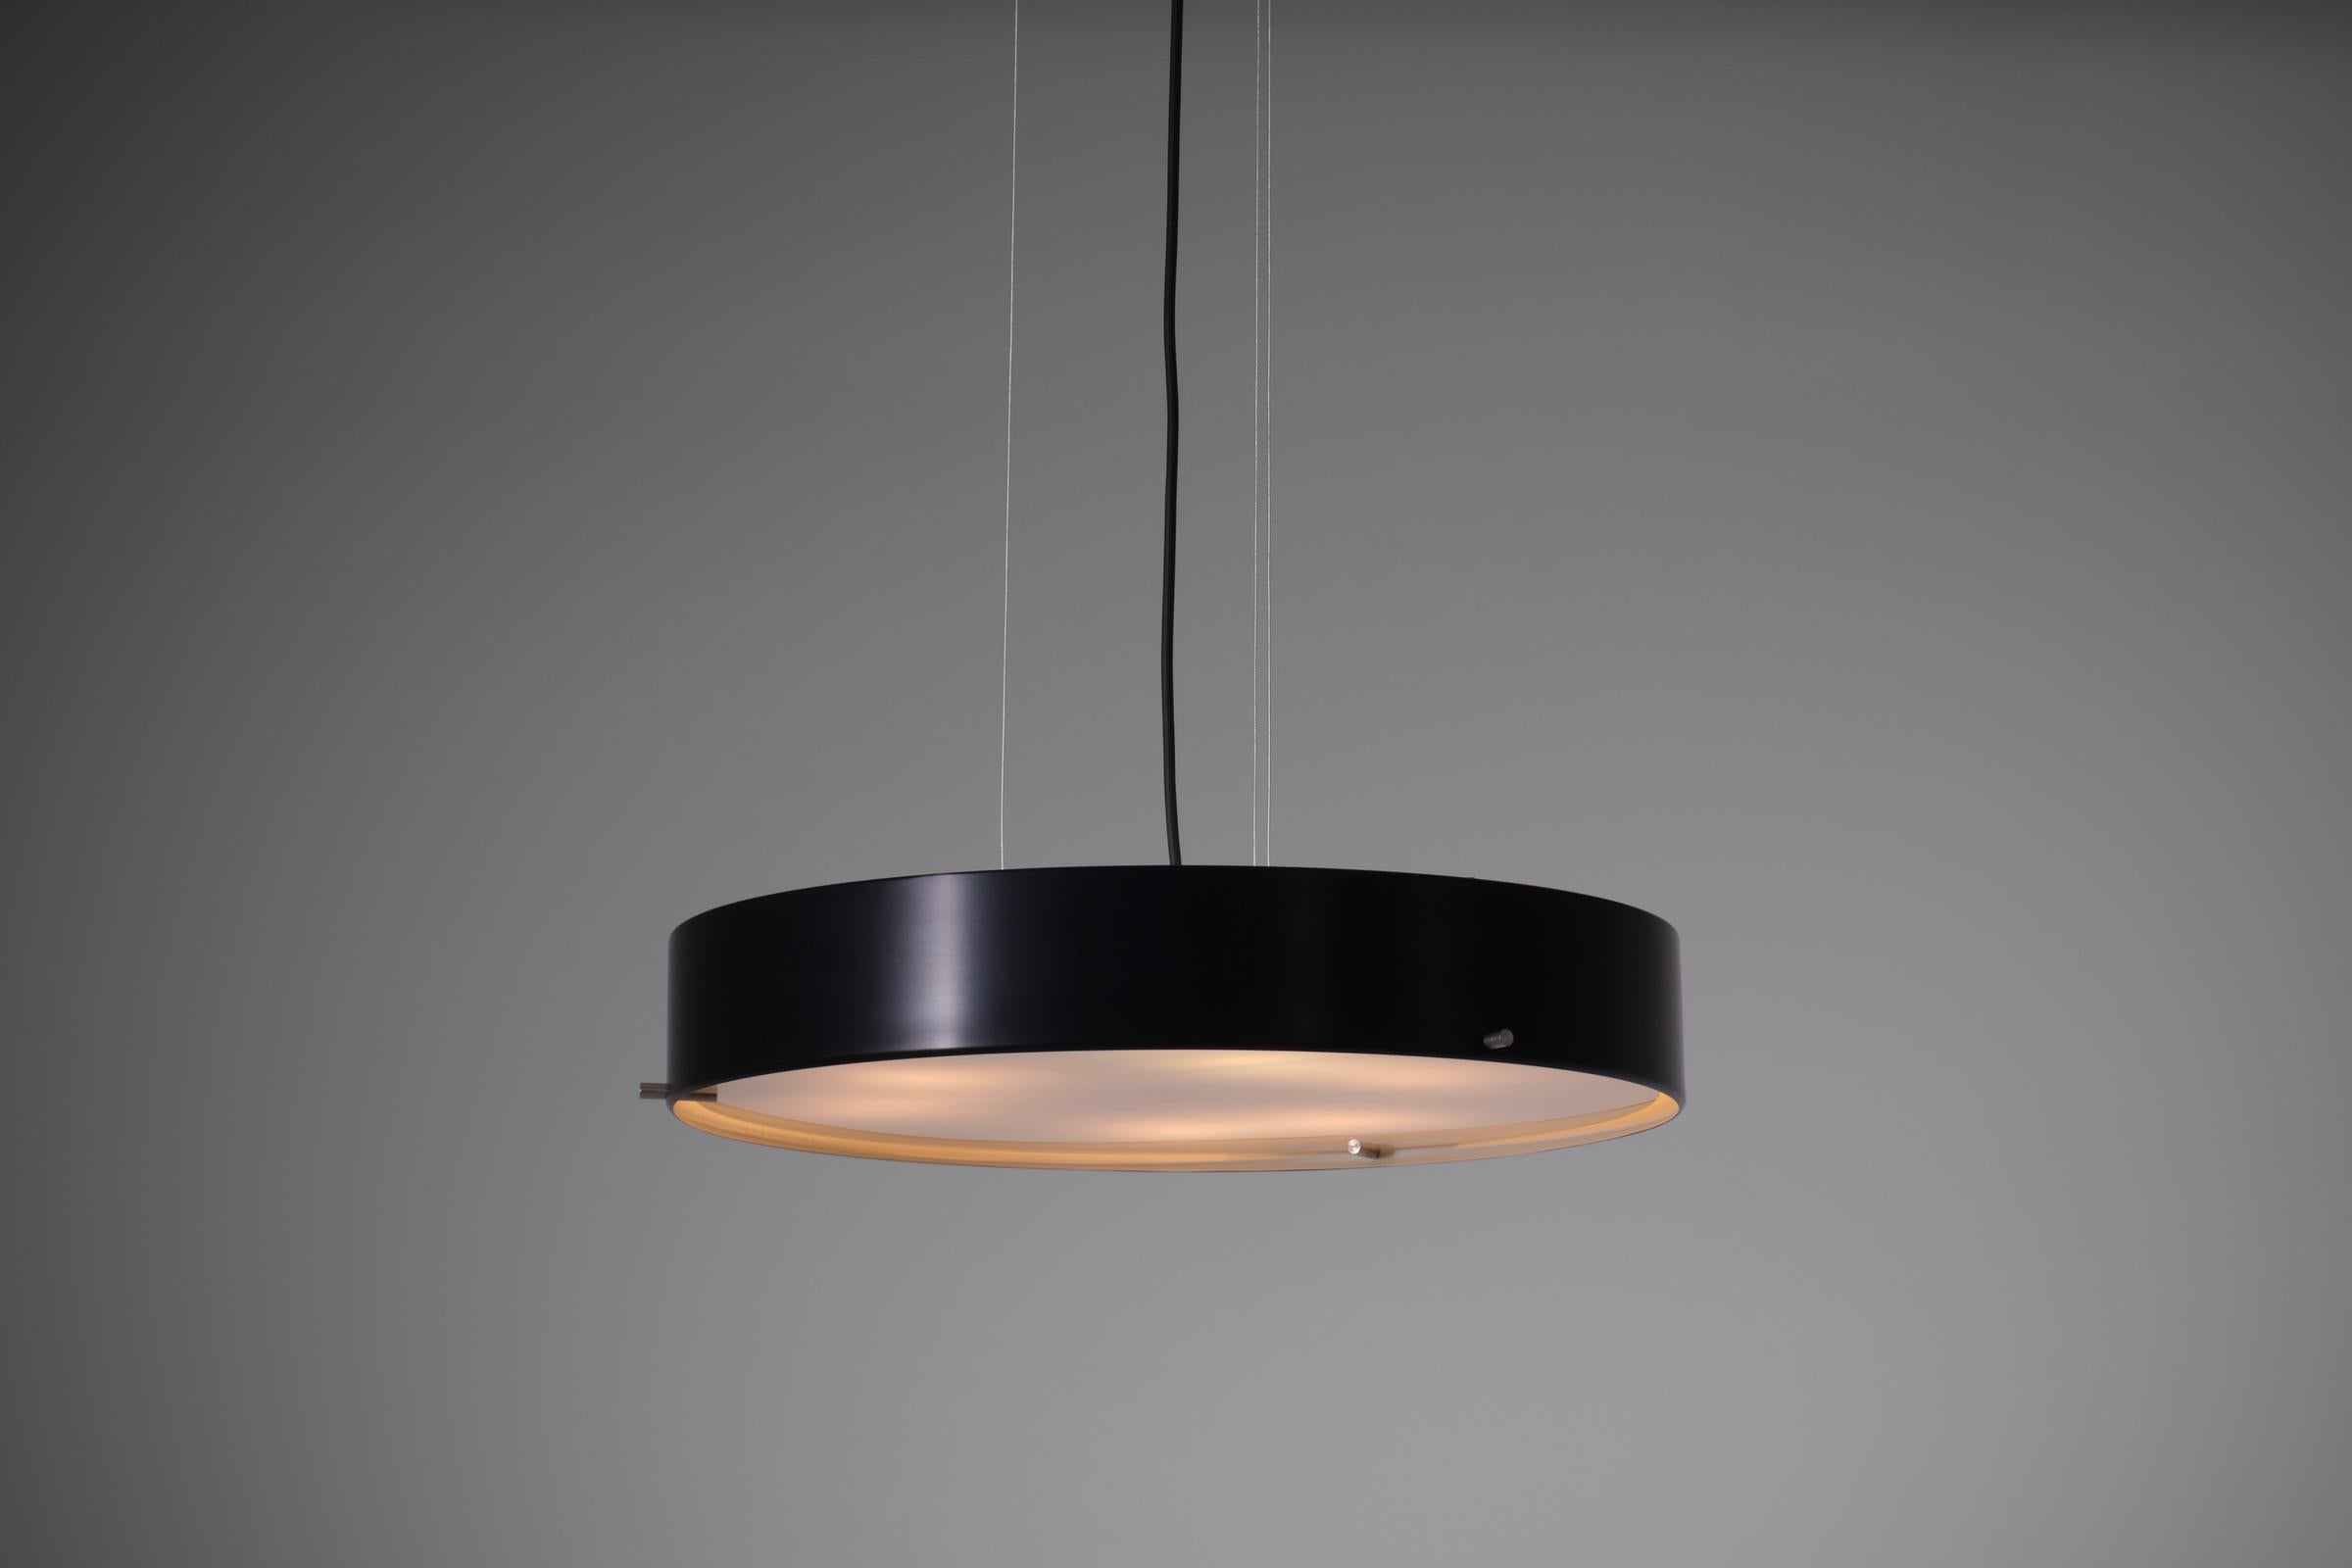 Ceiling light ‘288’ by Bruno Gatta for Stilnovo, Italy 1960. Sophisticated minimalistic design composed out of a large cilinder - made out of black lacquered aluminum, nickel details and opaline glass. The lamp provides a good light due to the six